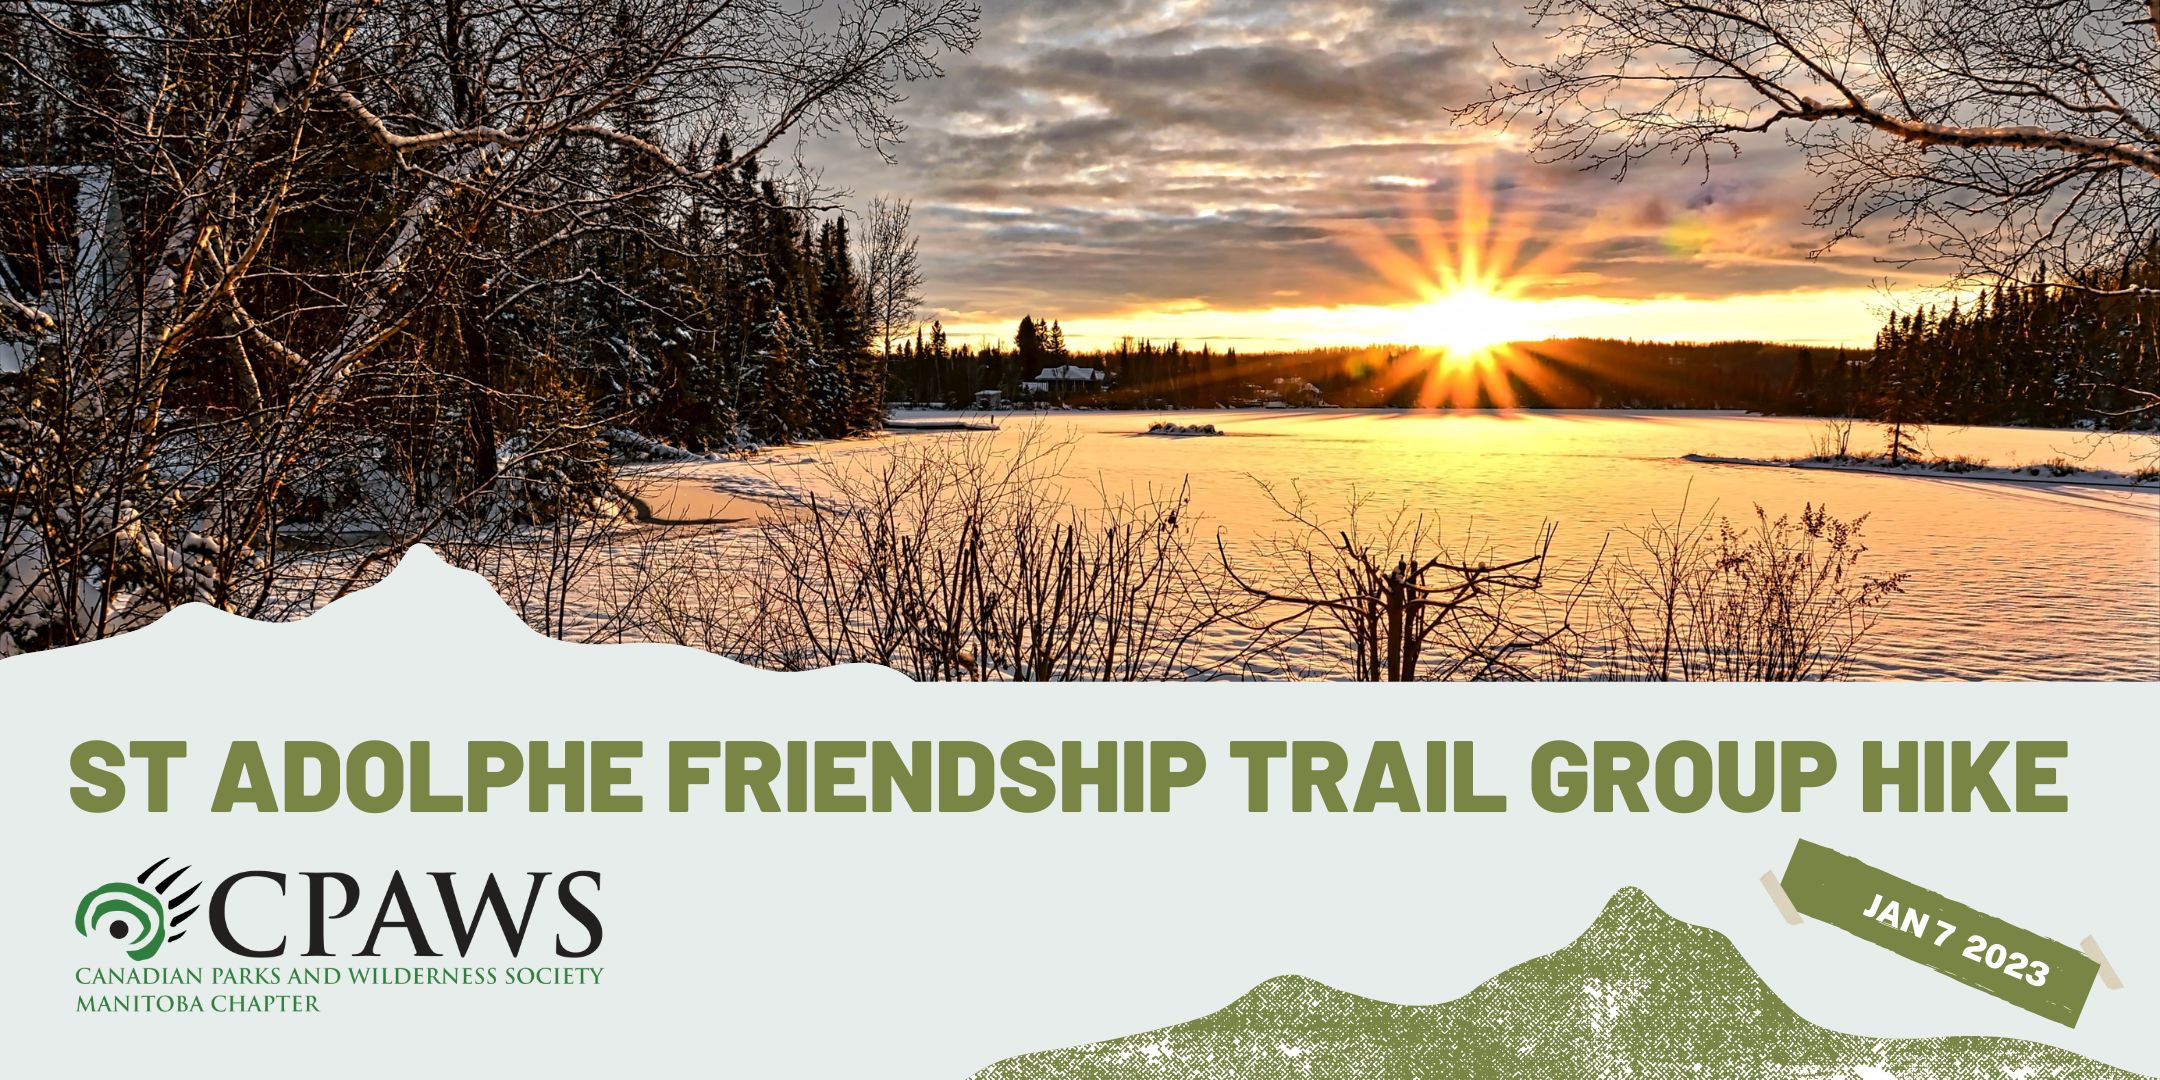 St Adolphe Friendship Trail Group Hike in the winter for January 7